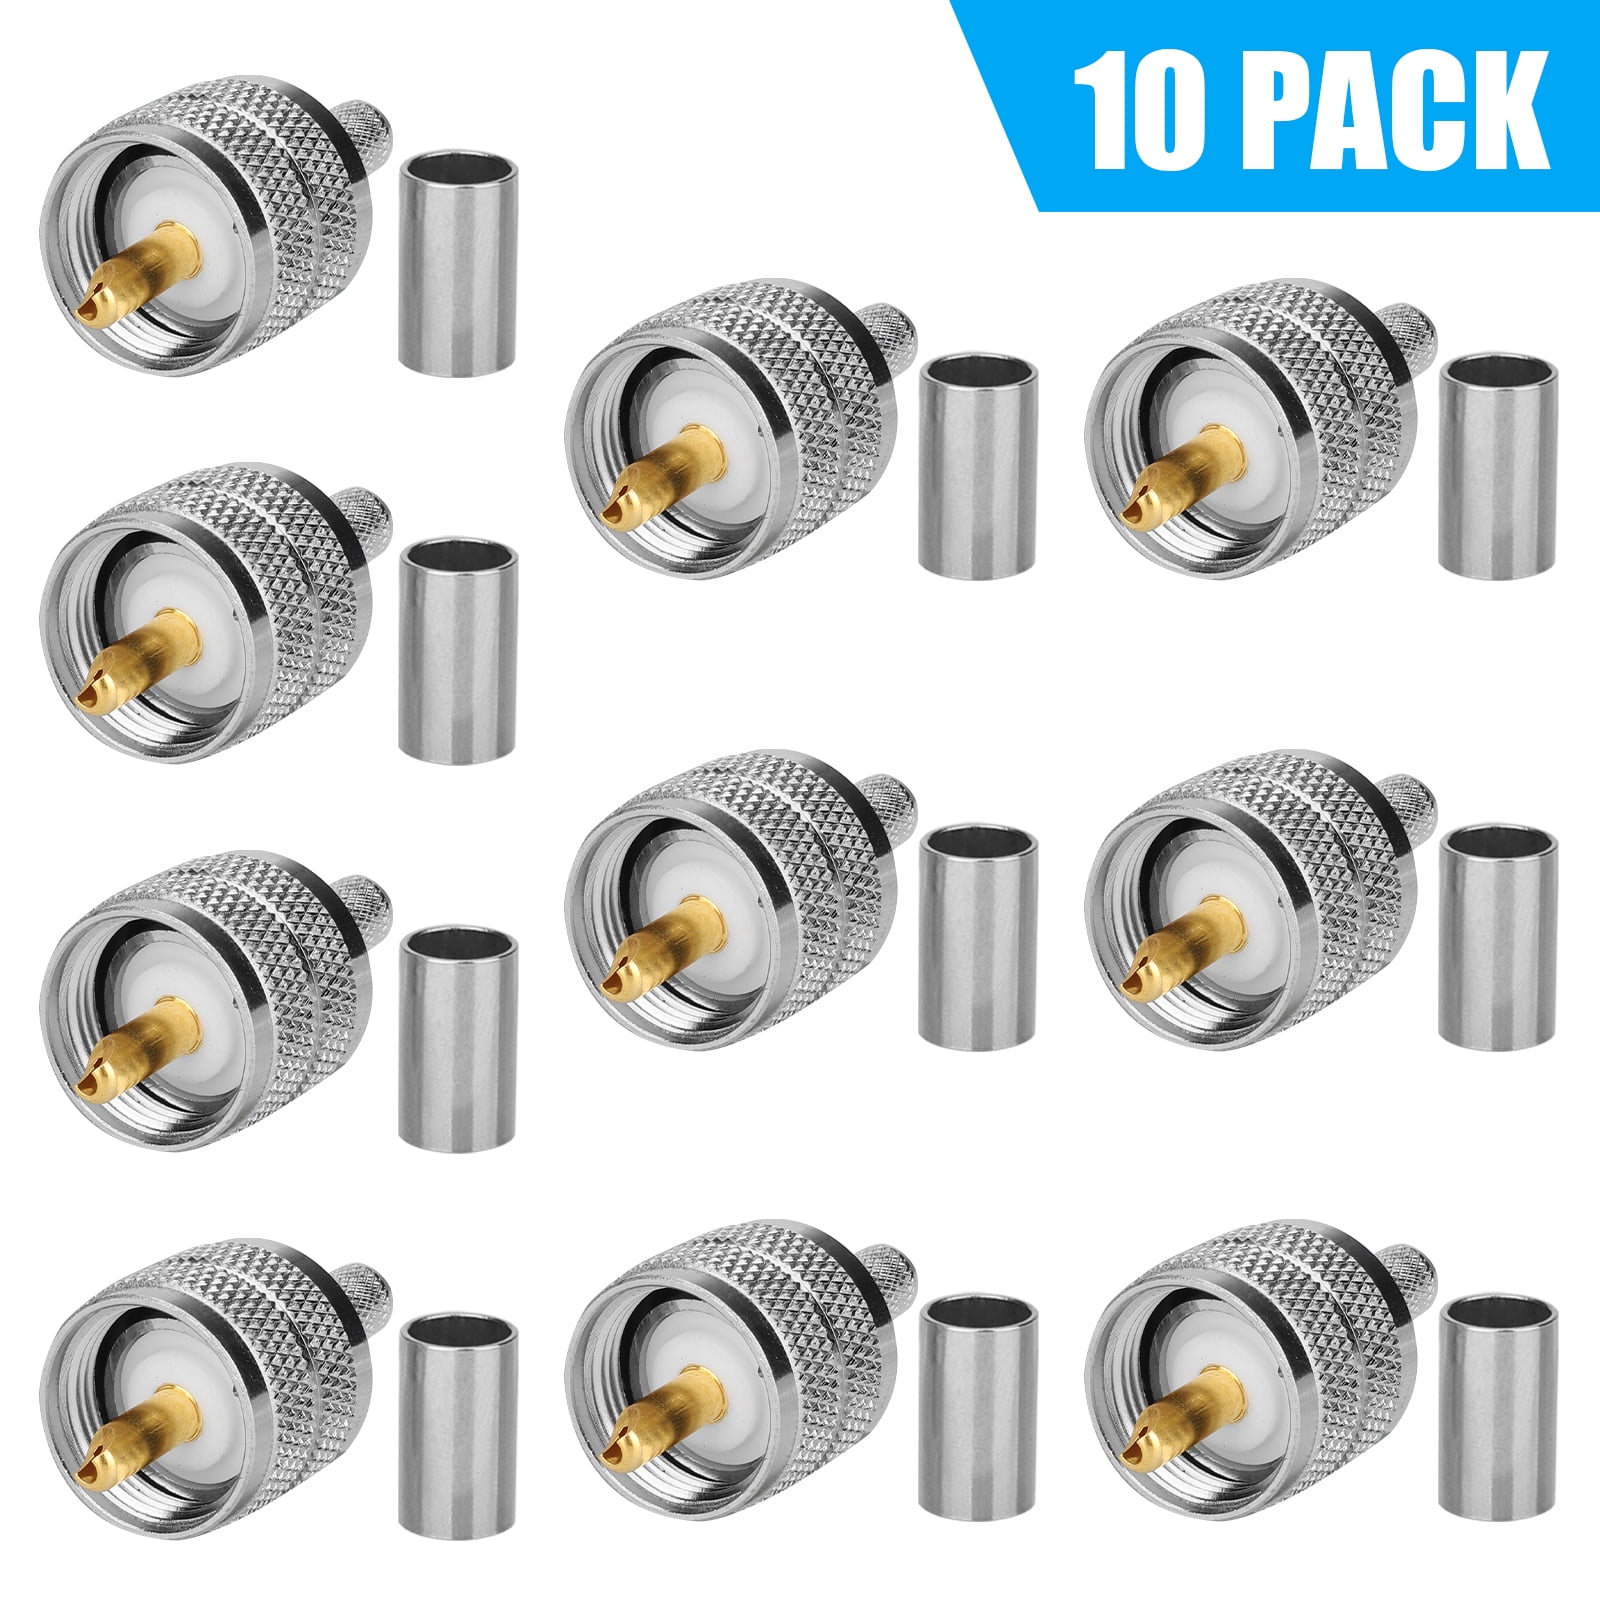 10 pack  PL259 Male UHF solder crimp for  LMR-240  RG-8X  Cable 50 ohm Connector